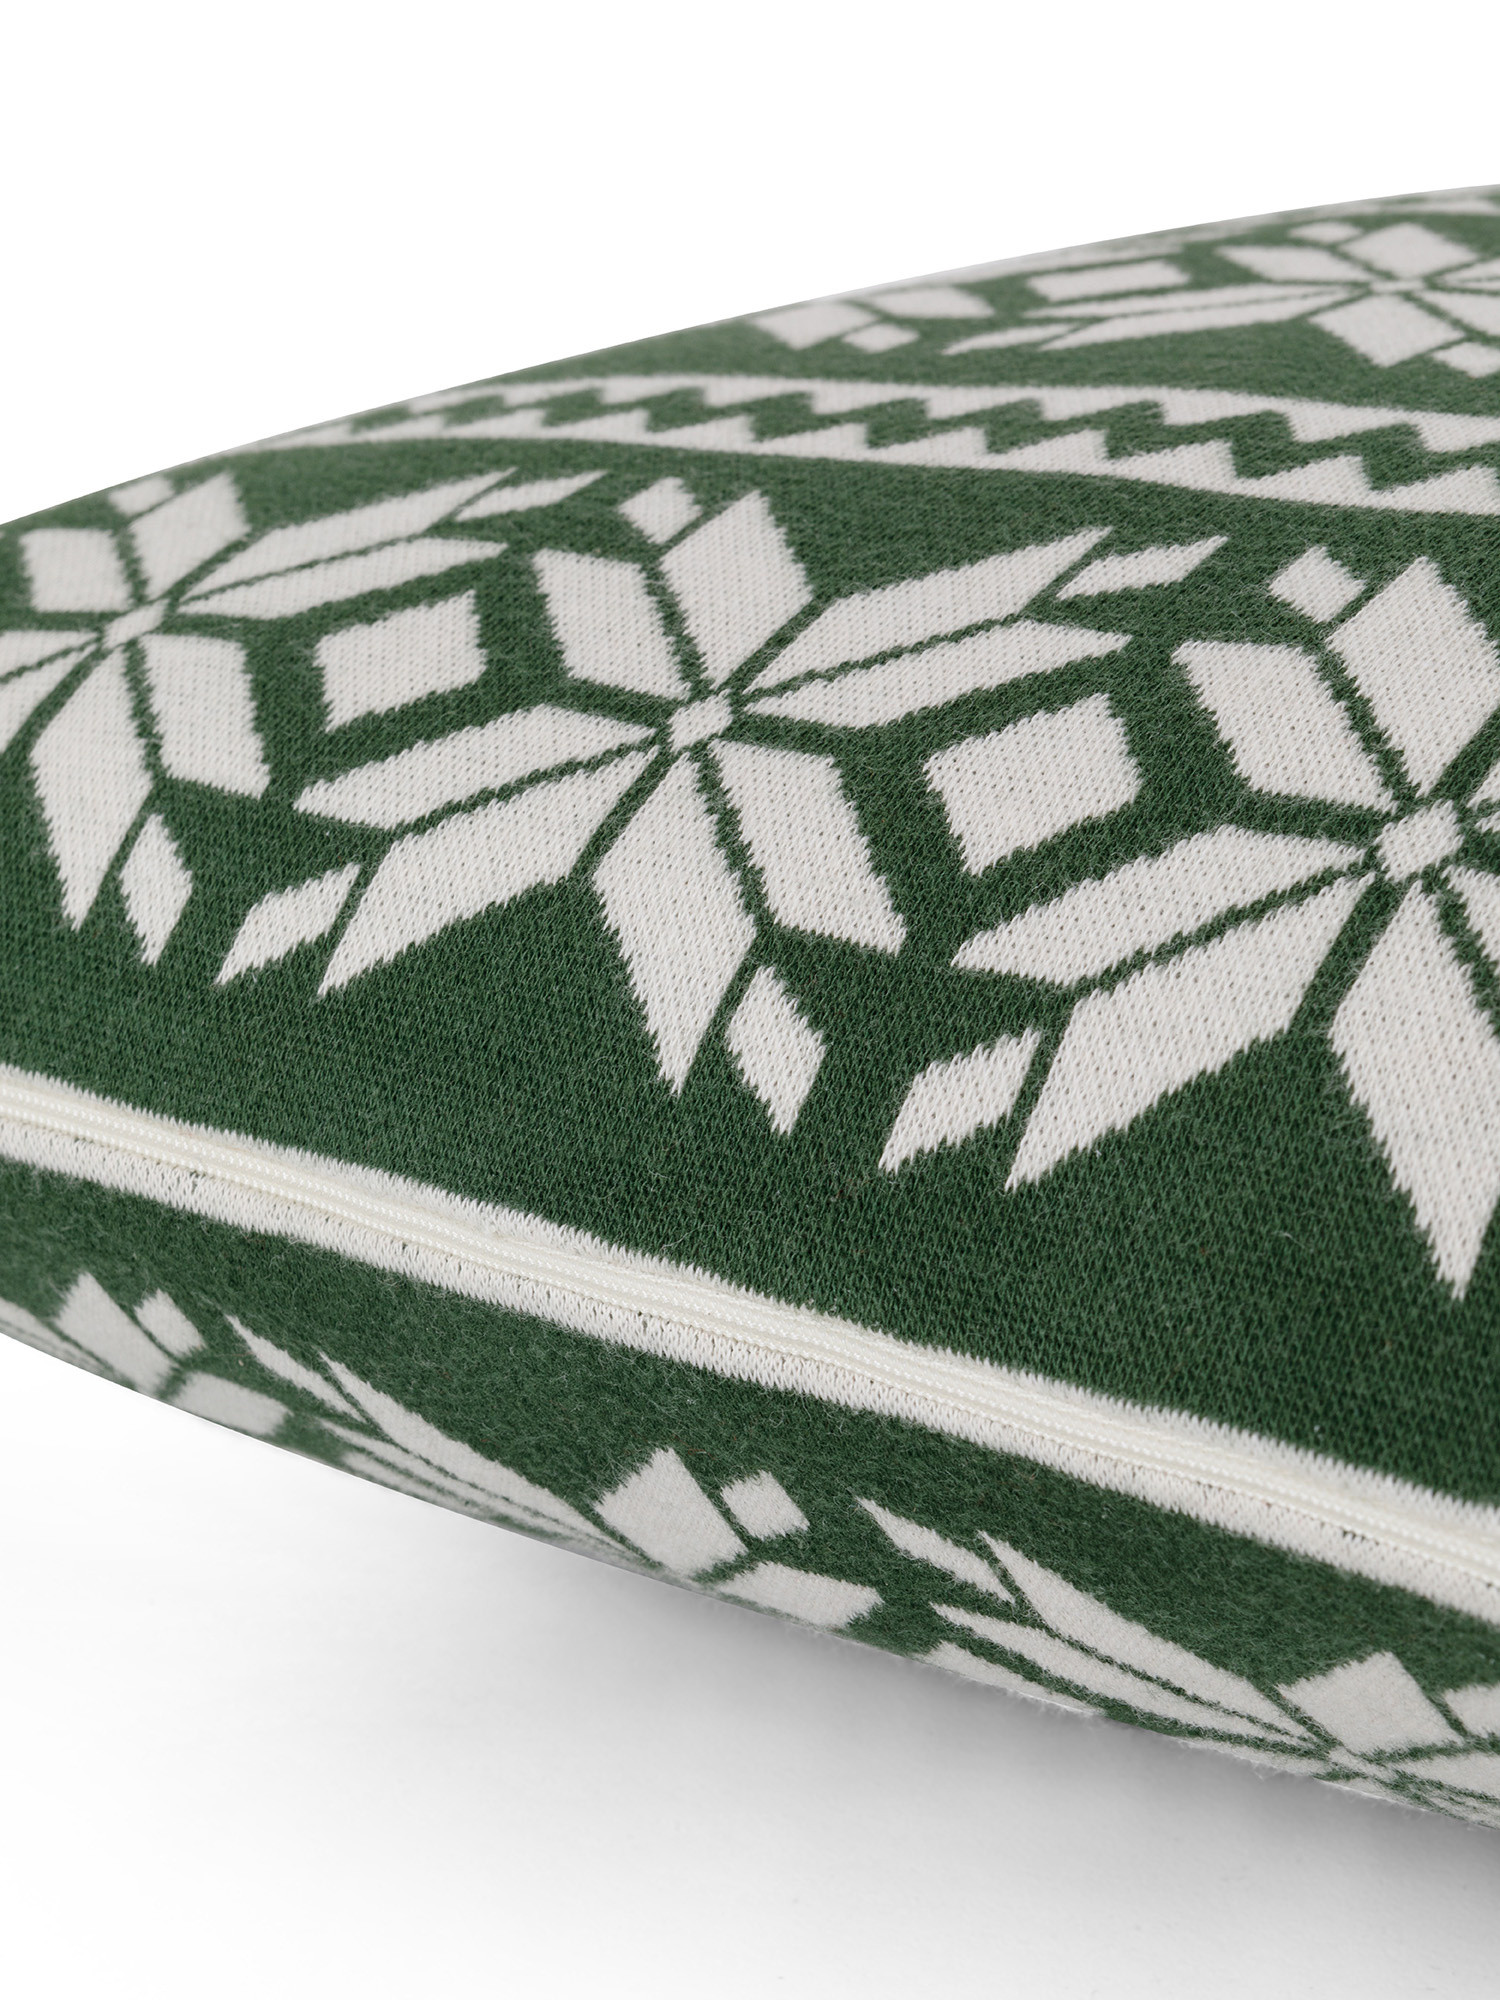 Jacquard knit cushion with geometric pattern 45x45 cm, Green, large image number 2